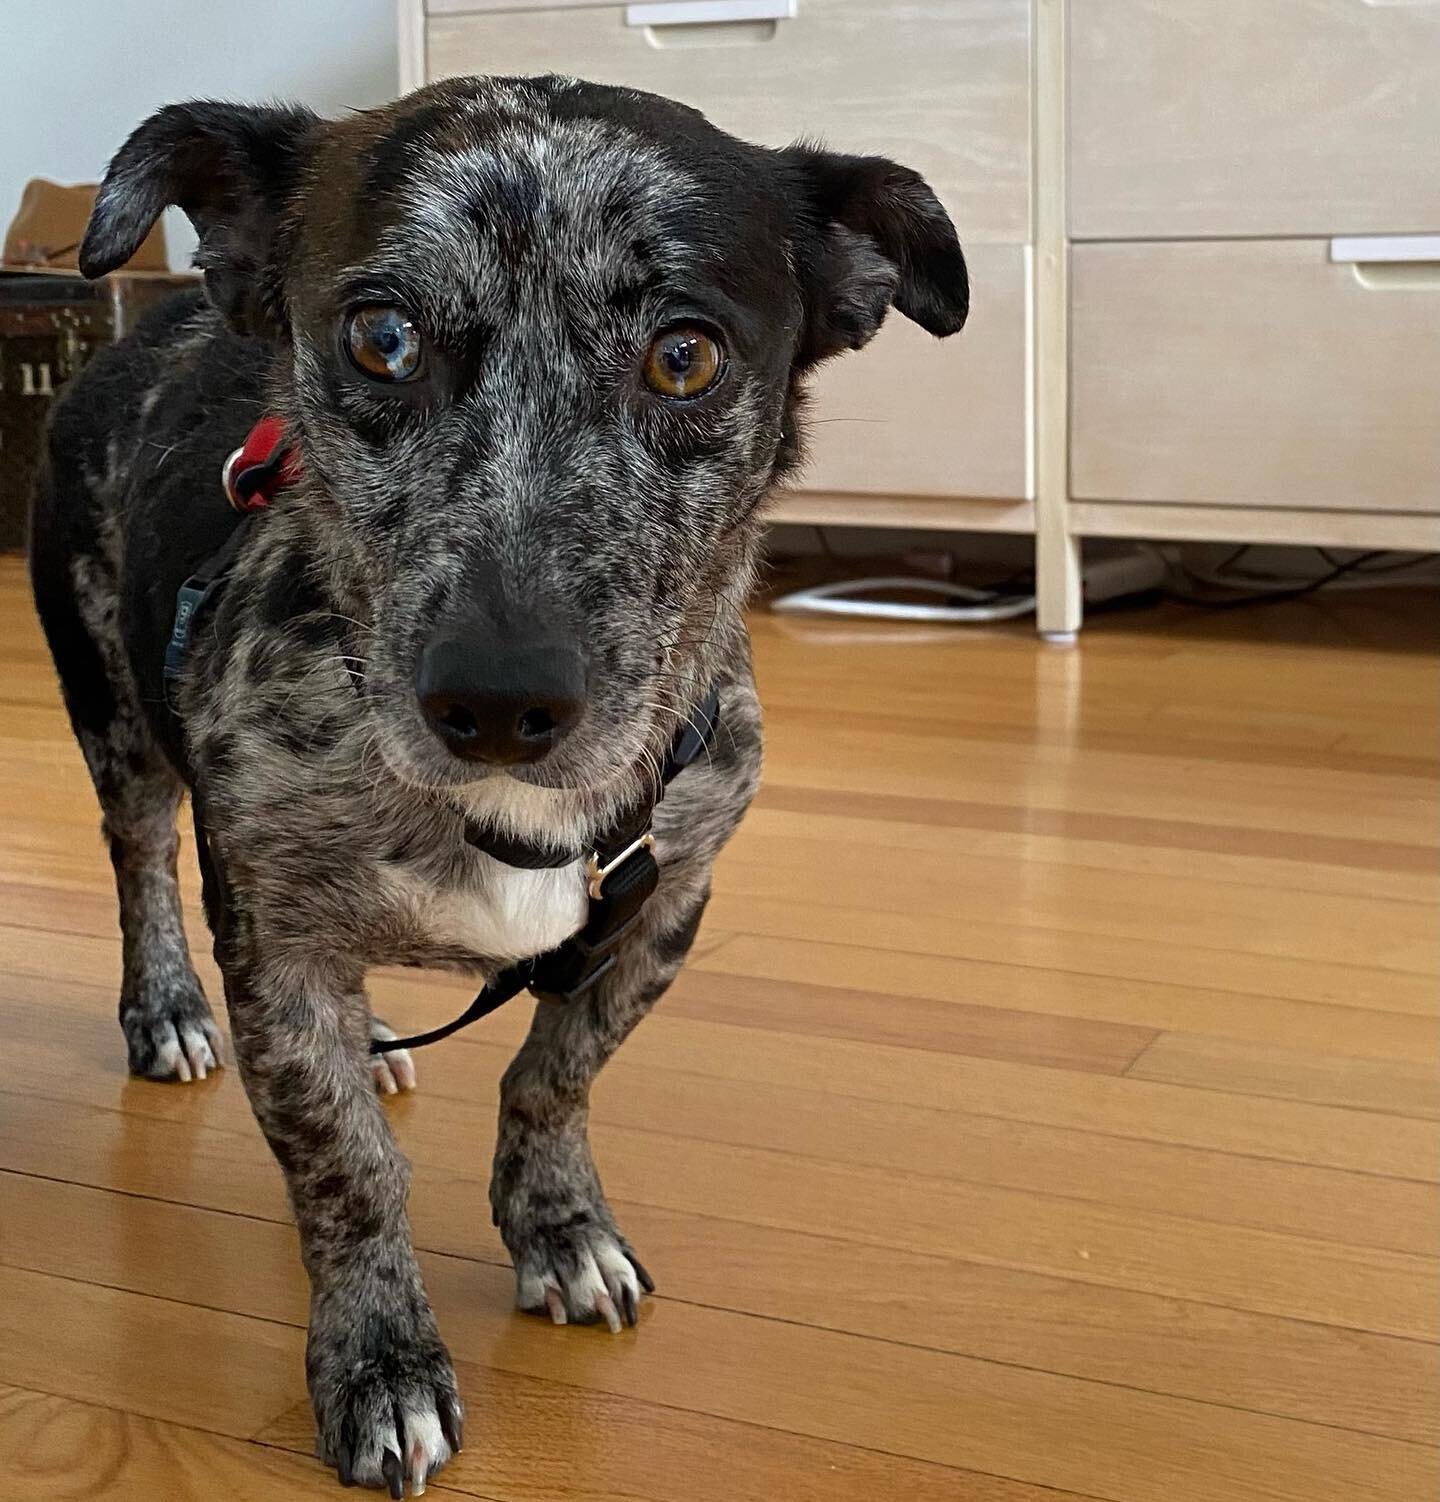 Meet Bandit!!💙
This super sweet 1 year old doxie mix is a truly mild-mannered and lovely addition to almost any home.

His foster mom says he&rsquo;s:

Housebroken
Walks well on a leash
Crate trained - loved to cuddle up in his crate with a plush to